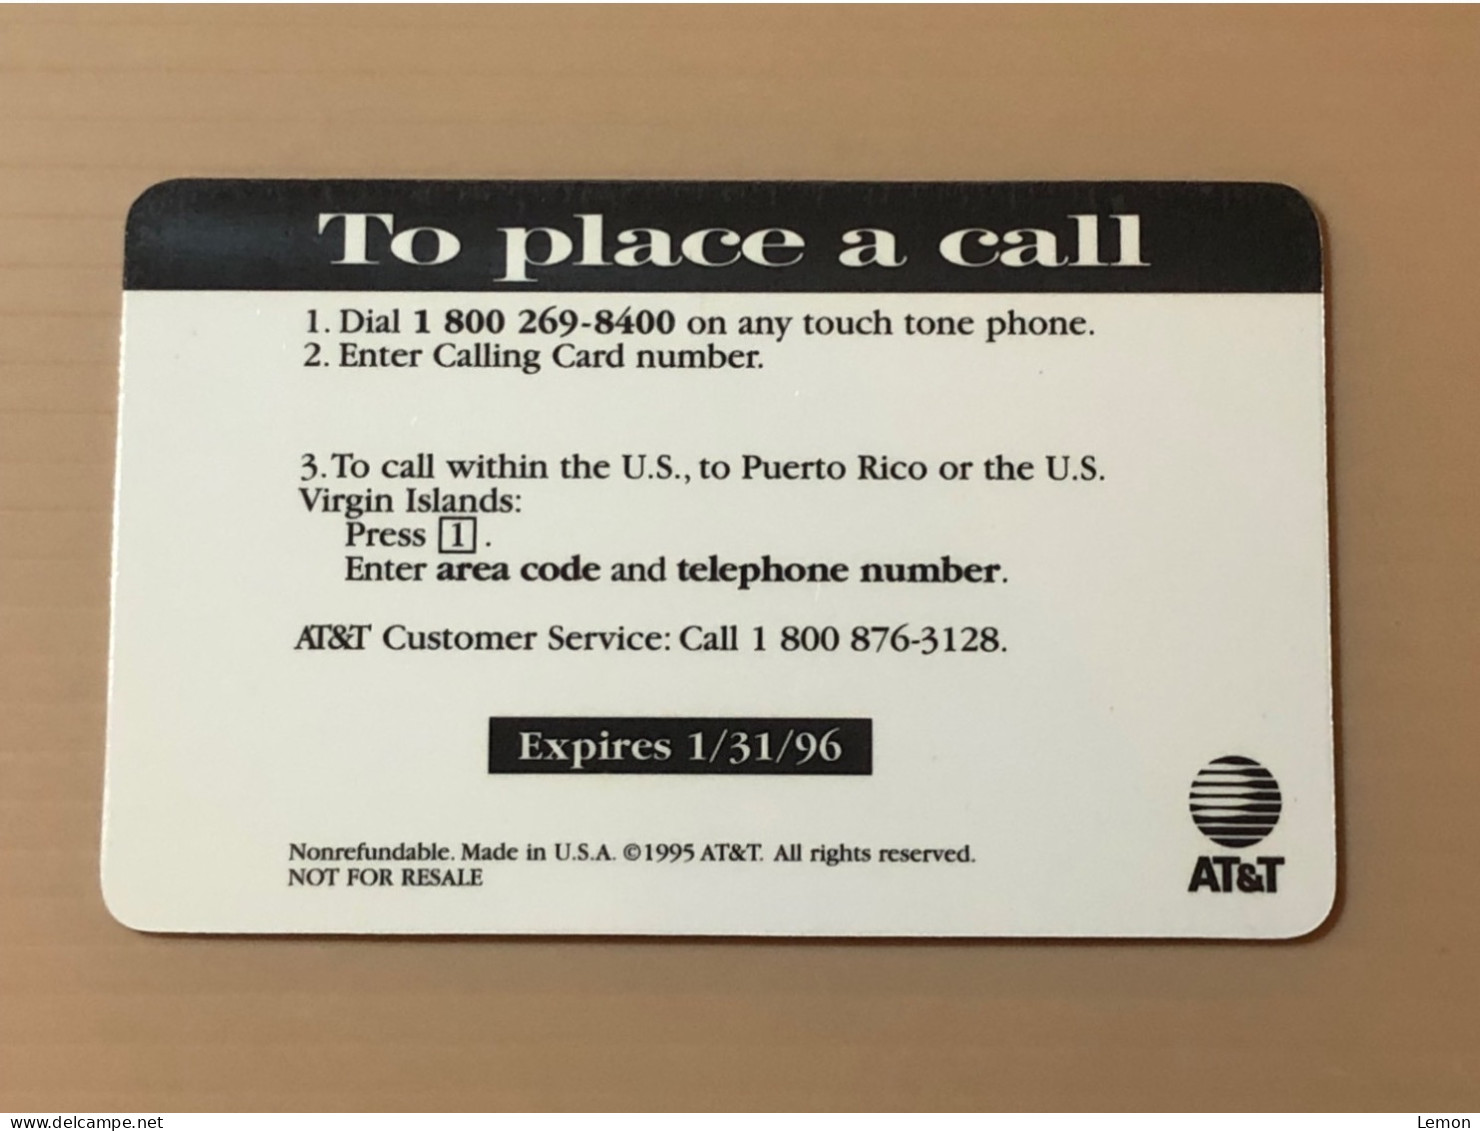 Mint USA UNITED STATES America Prepaid Telecard Phonecard, AT&T Annual Top Cops Award SAMPLE CARD, Set Of 1 Mint Card - Colecciones